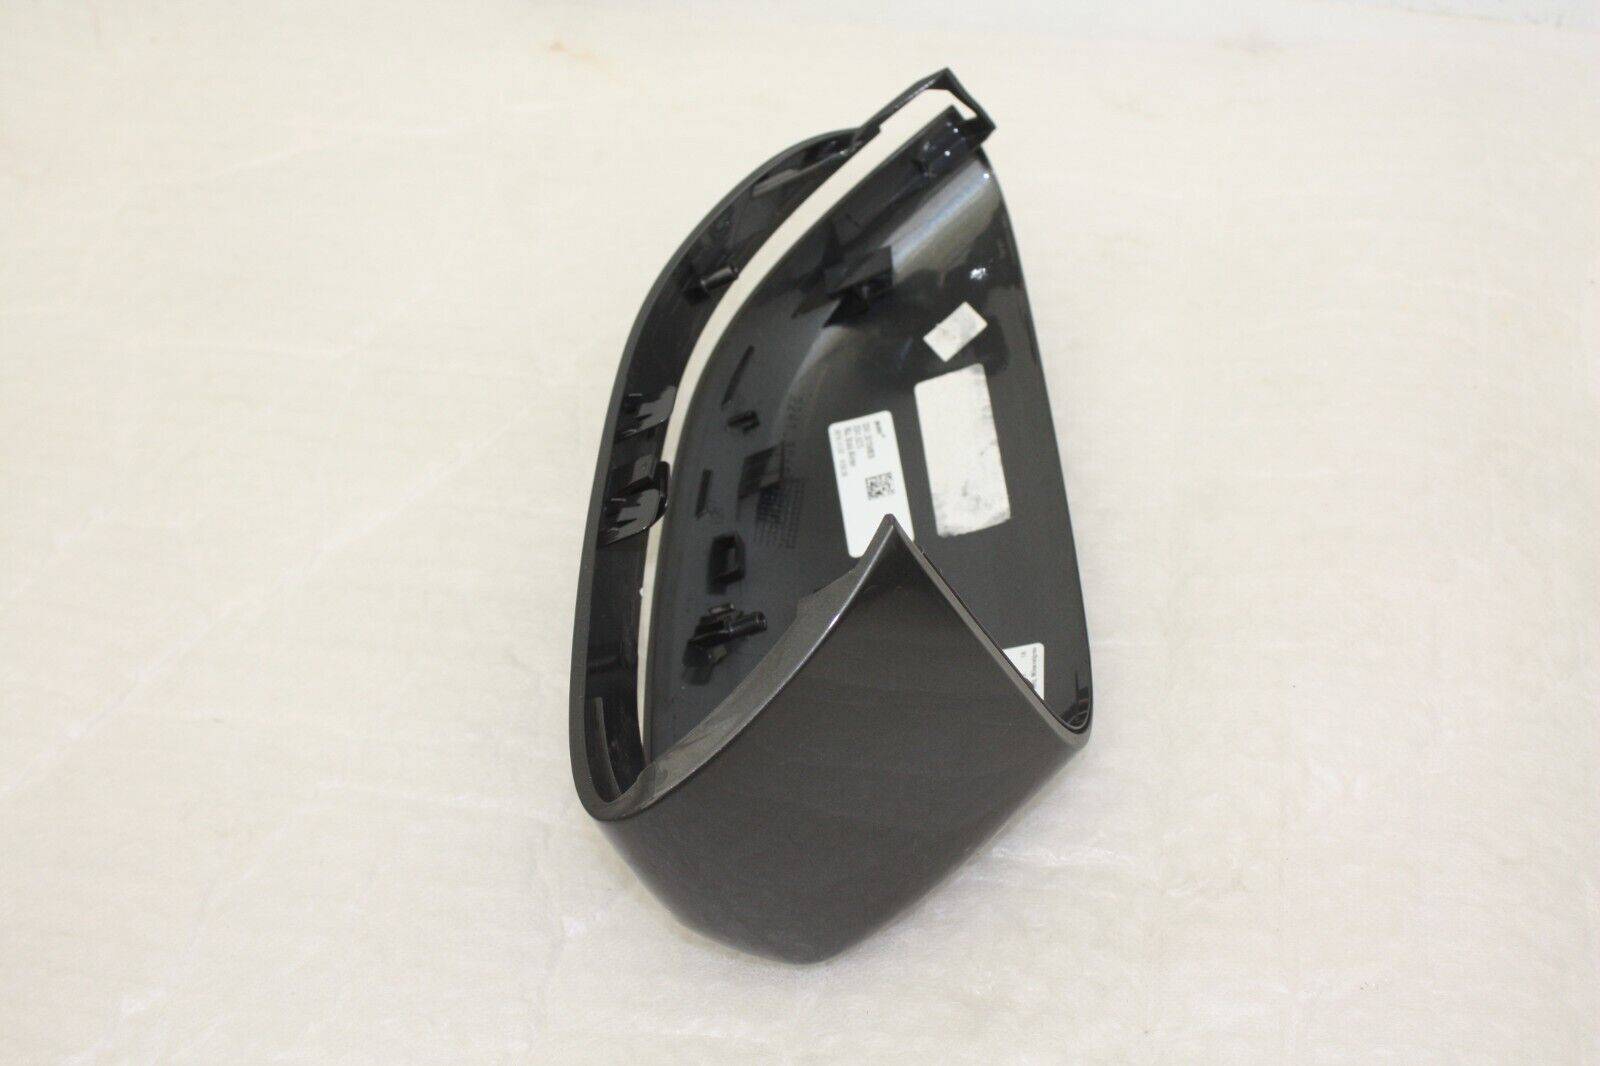 BMW-3-Series-G20-G21-Left-Mirror-Cover-Cap-2019-TO-2023-22416273-Genuine-176344088889-3